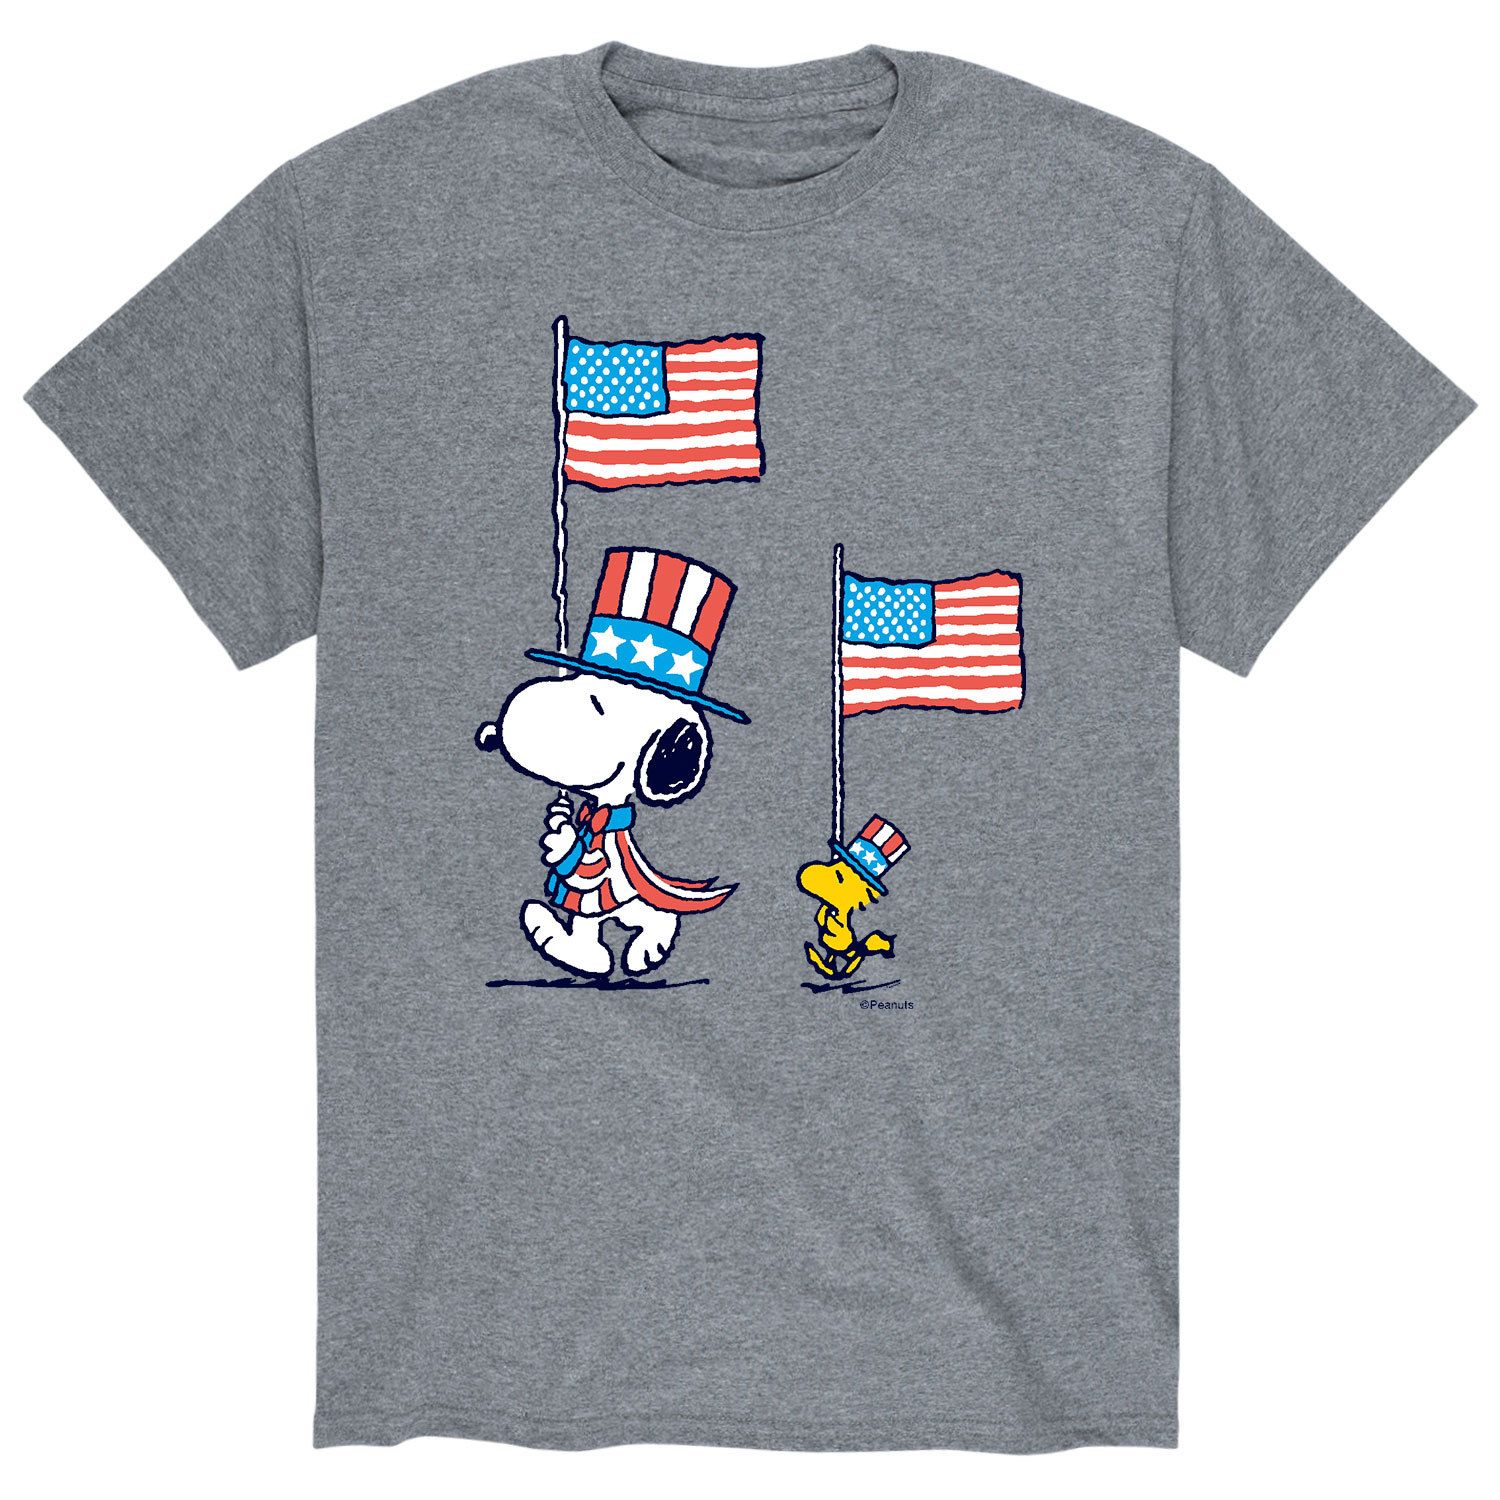 Мужская футболка Peanuts Snoopy Woodstock March Licensed Character мужская футболка peanuts snoopy woodstock joy licensed character